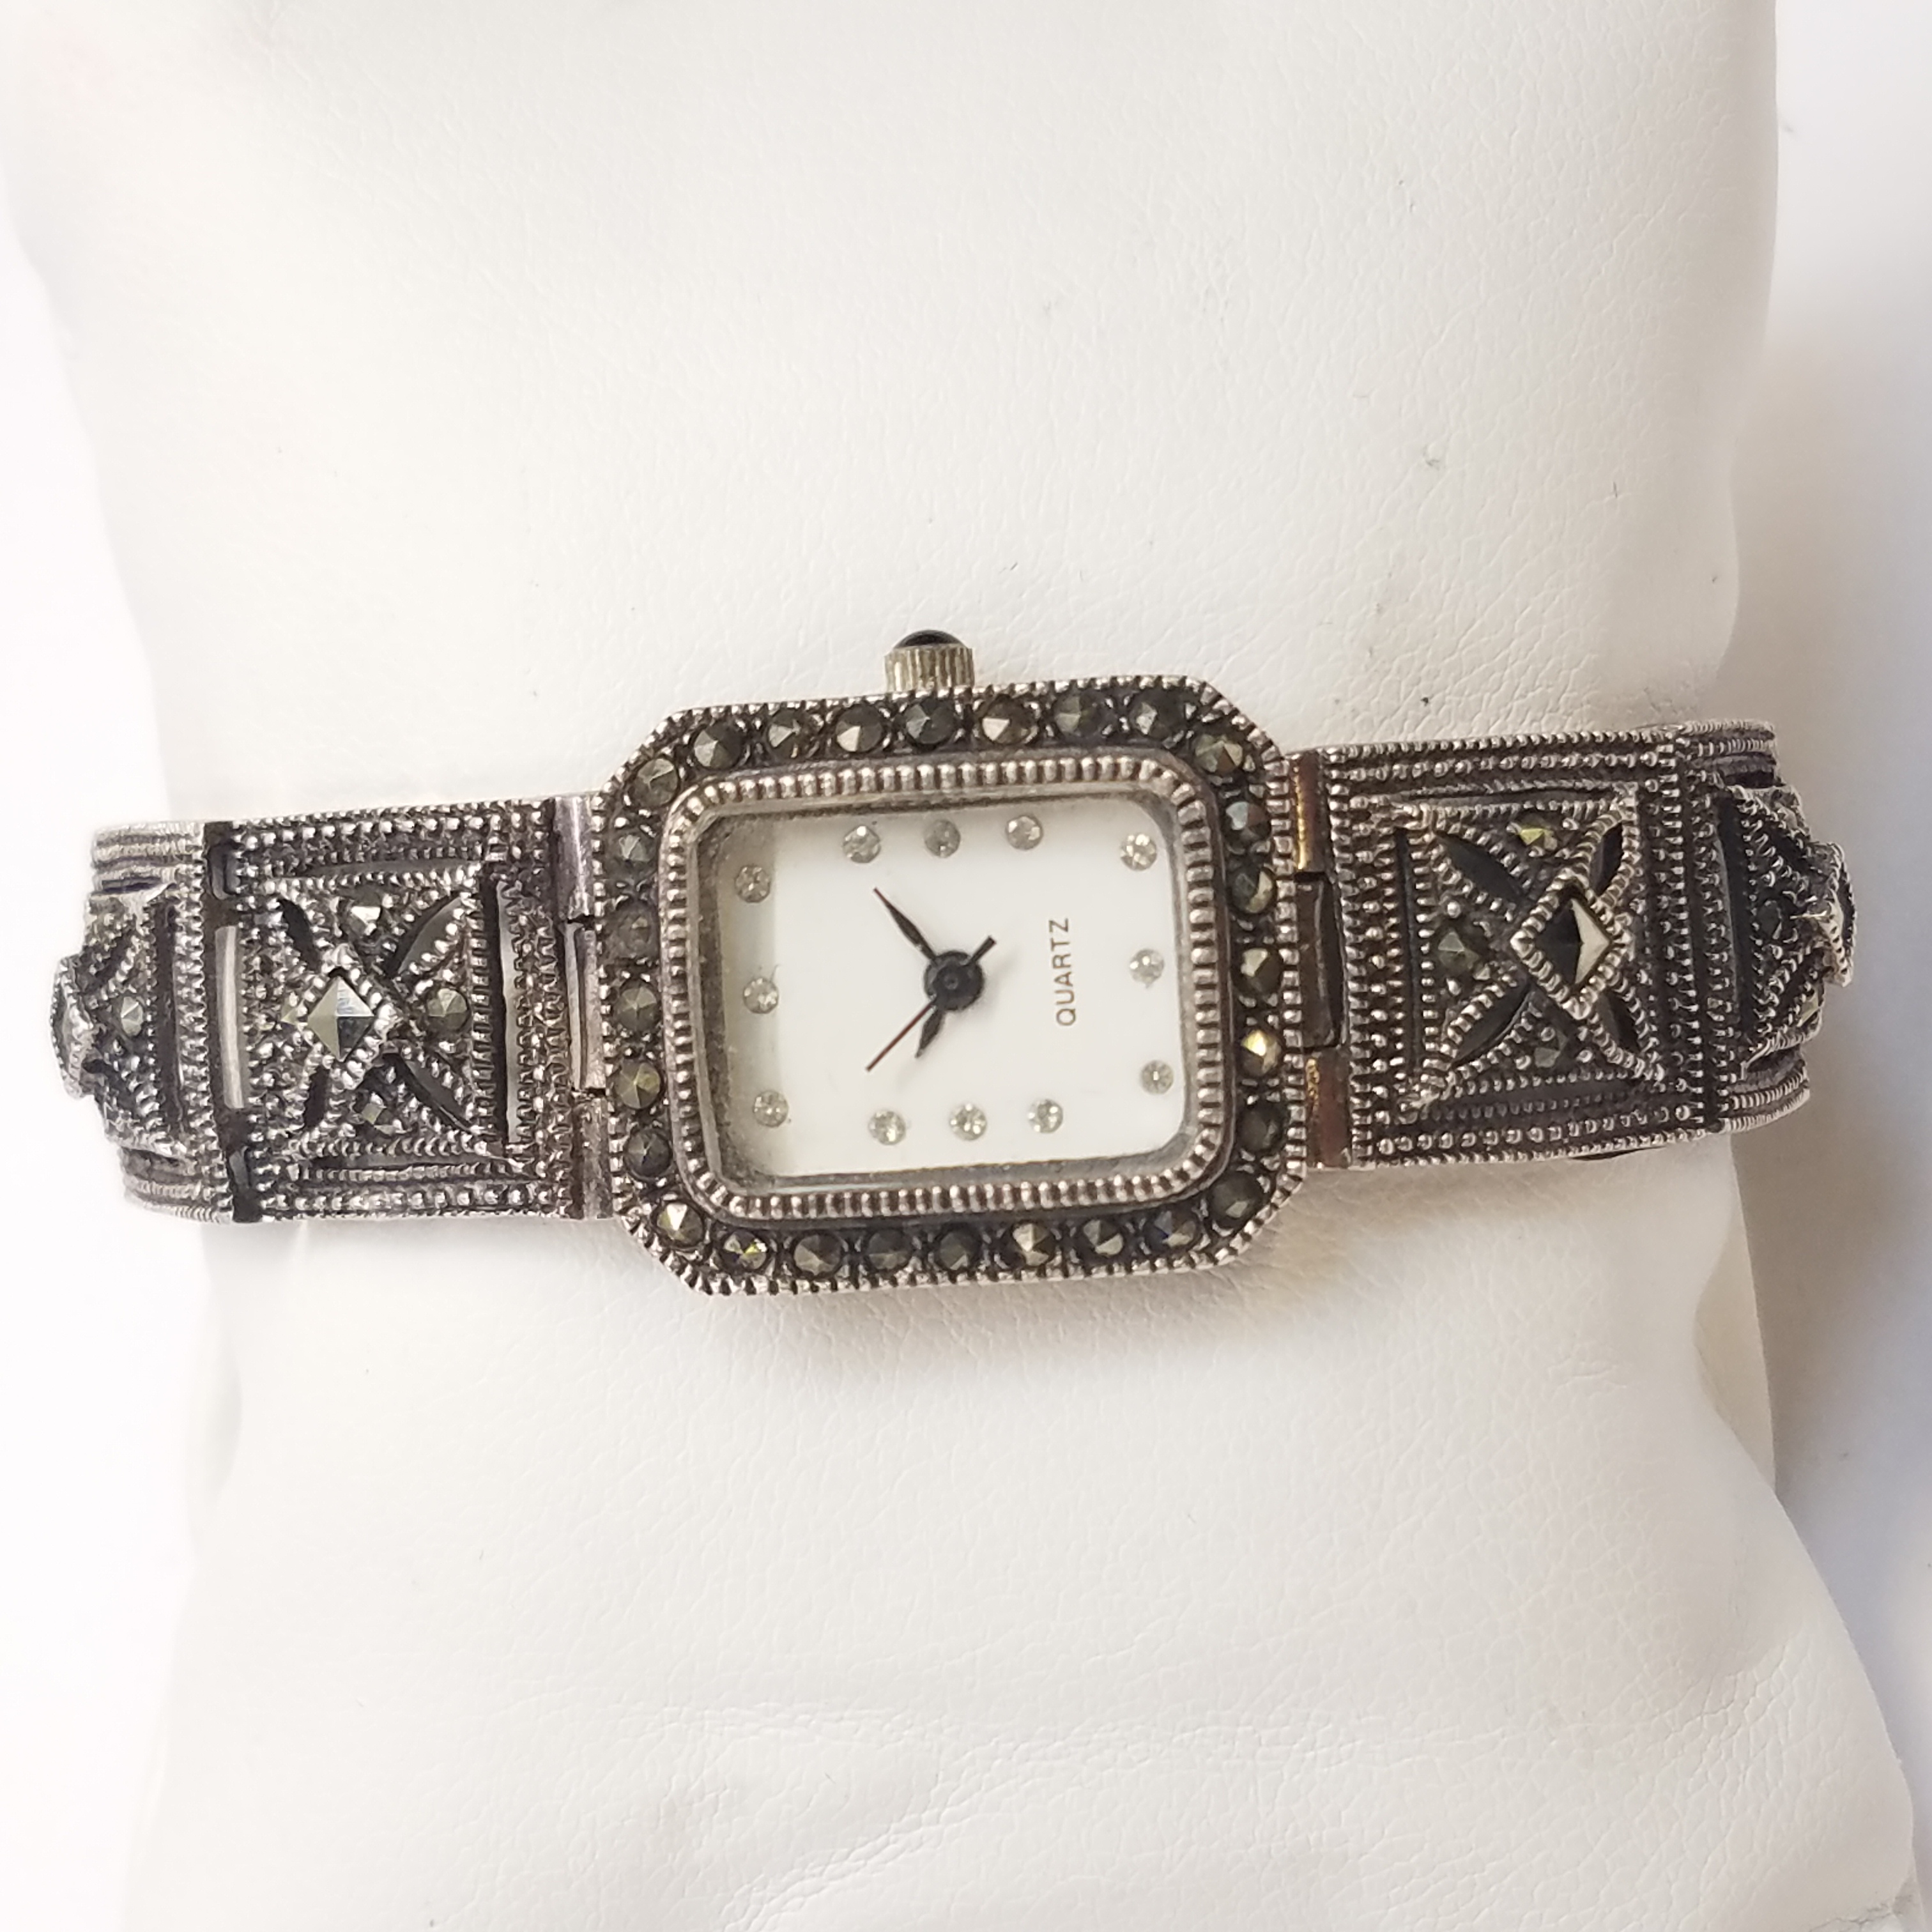 Lot - 3 MARCASITE WATCHES - 1 DATED 1955 HALLMARKED STERLING SILVER WITH  BOW MARCASITE DECORATION (2) 1960 BRACELET DOUBLE STRANDED STERLING SILVER  & AUSTRALIAN FARRER PRICE DECO WRIST WATCH VINTAGE C. 1960 17J